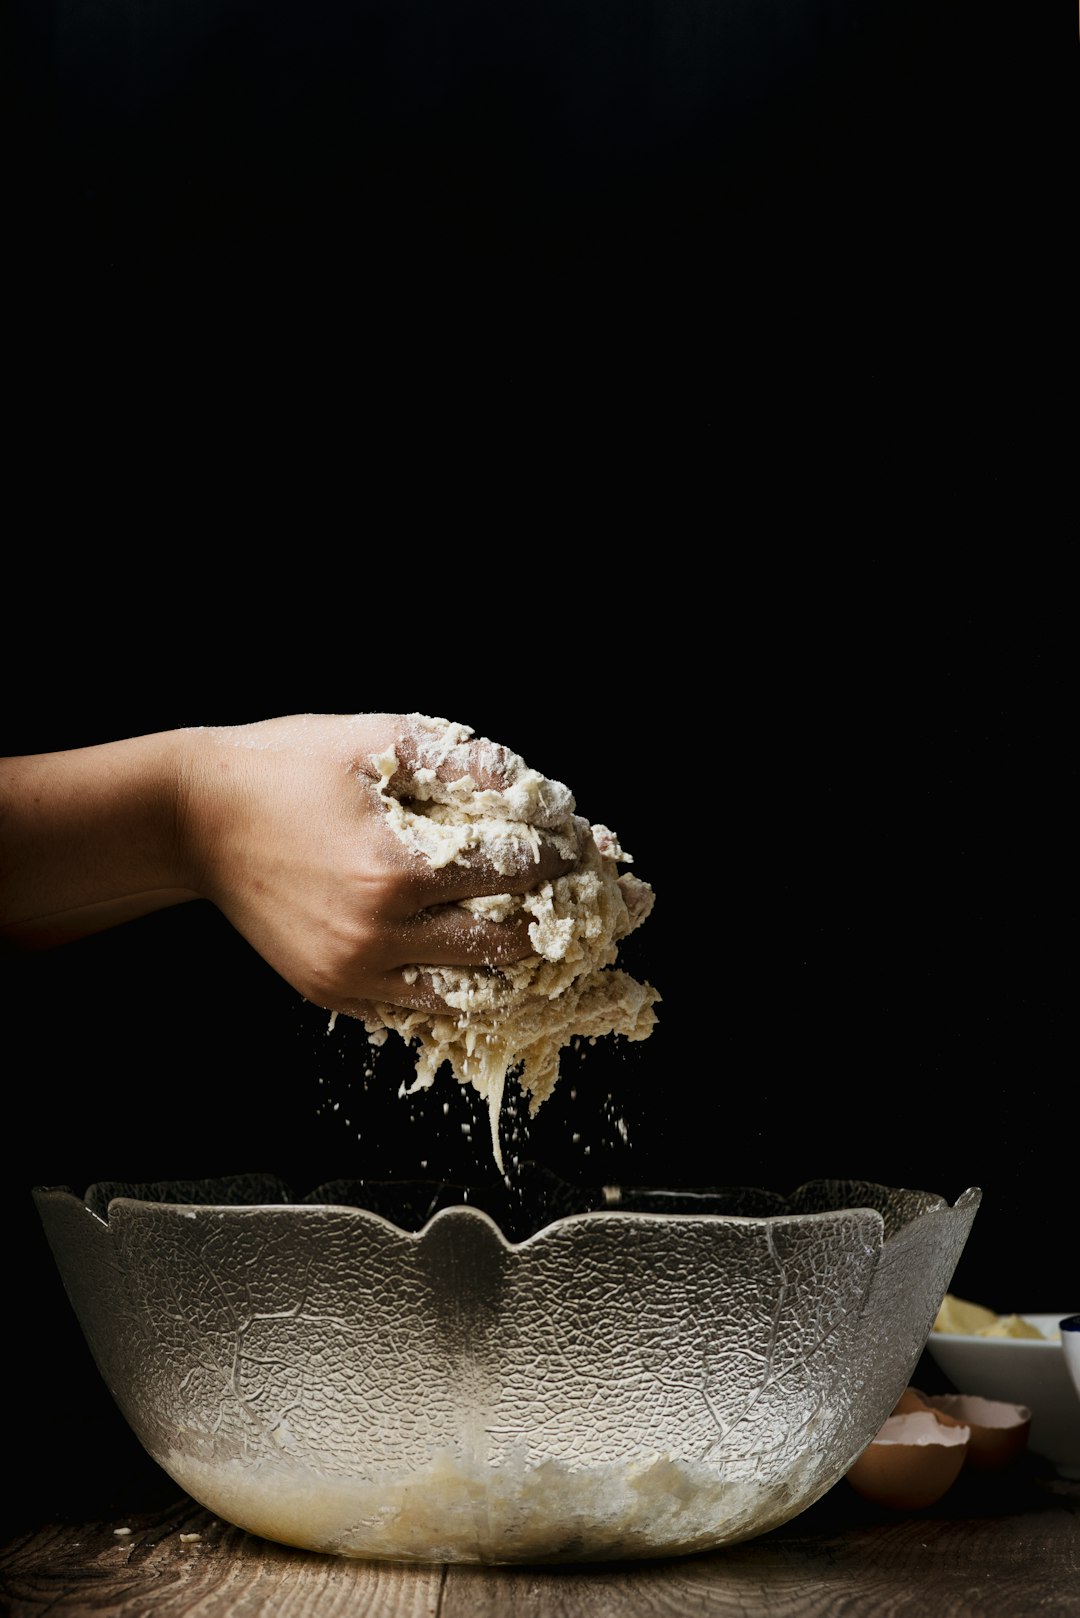 A person's hand kneading dough over a glass bowl